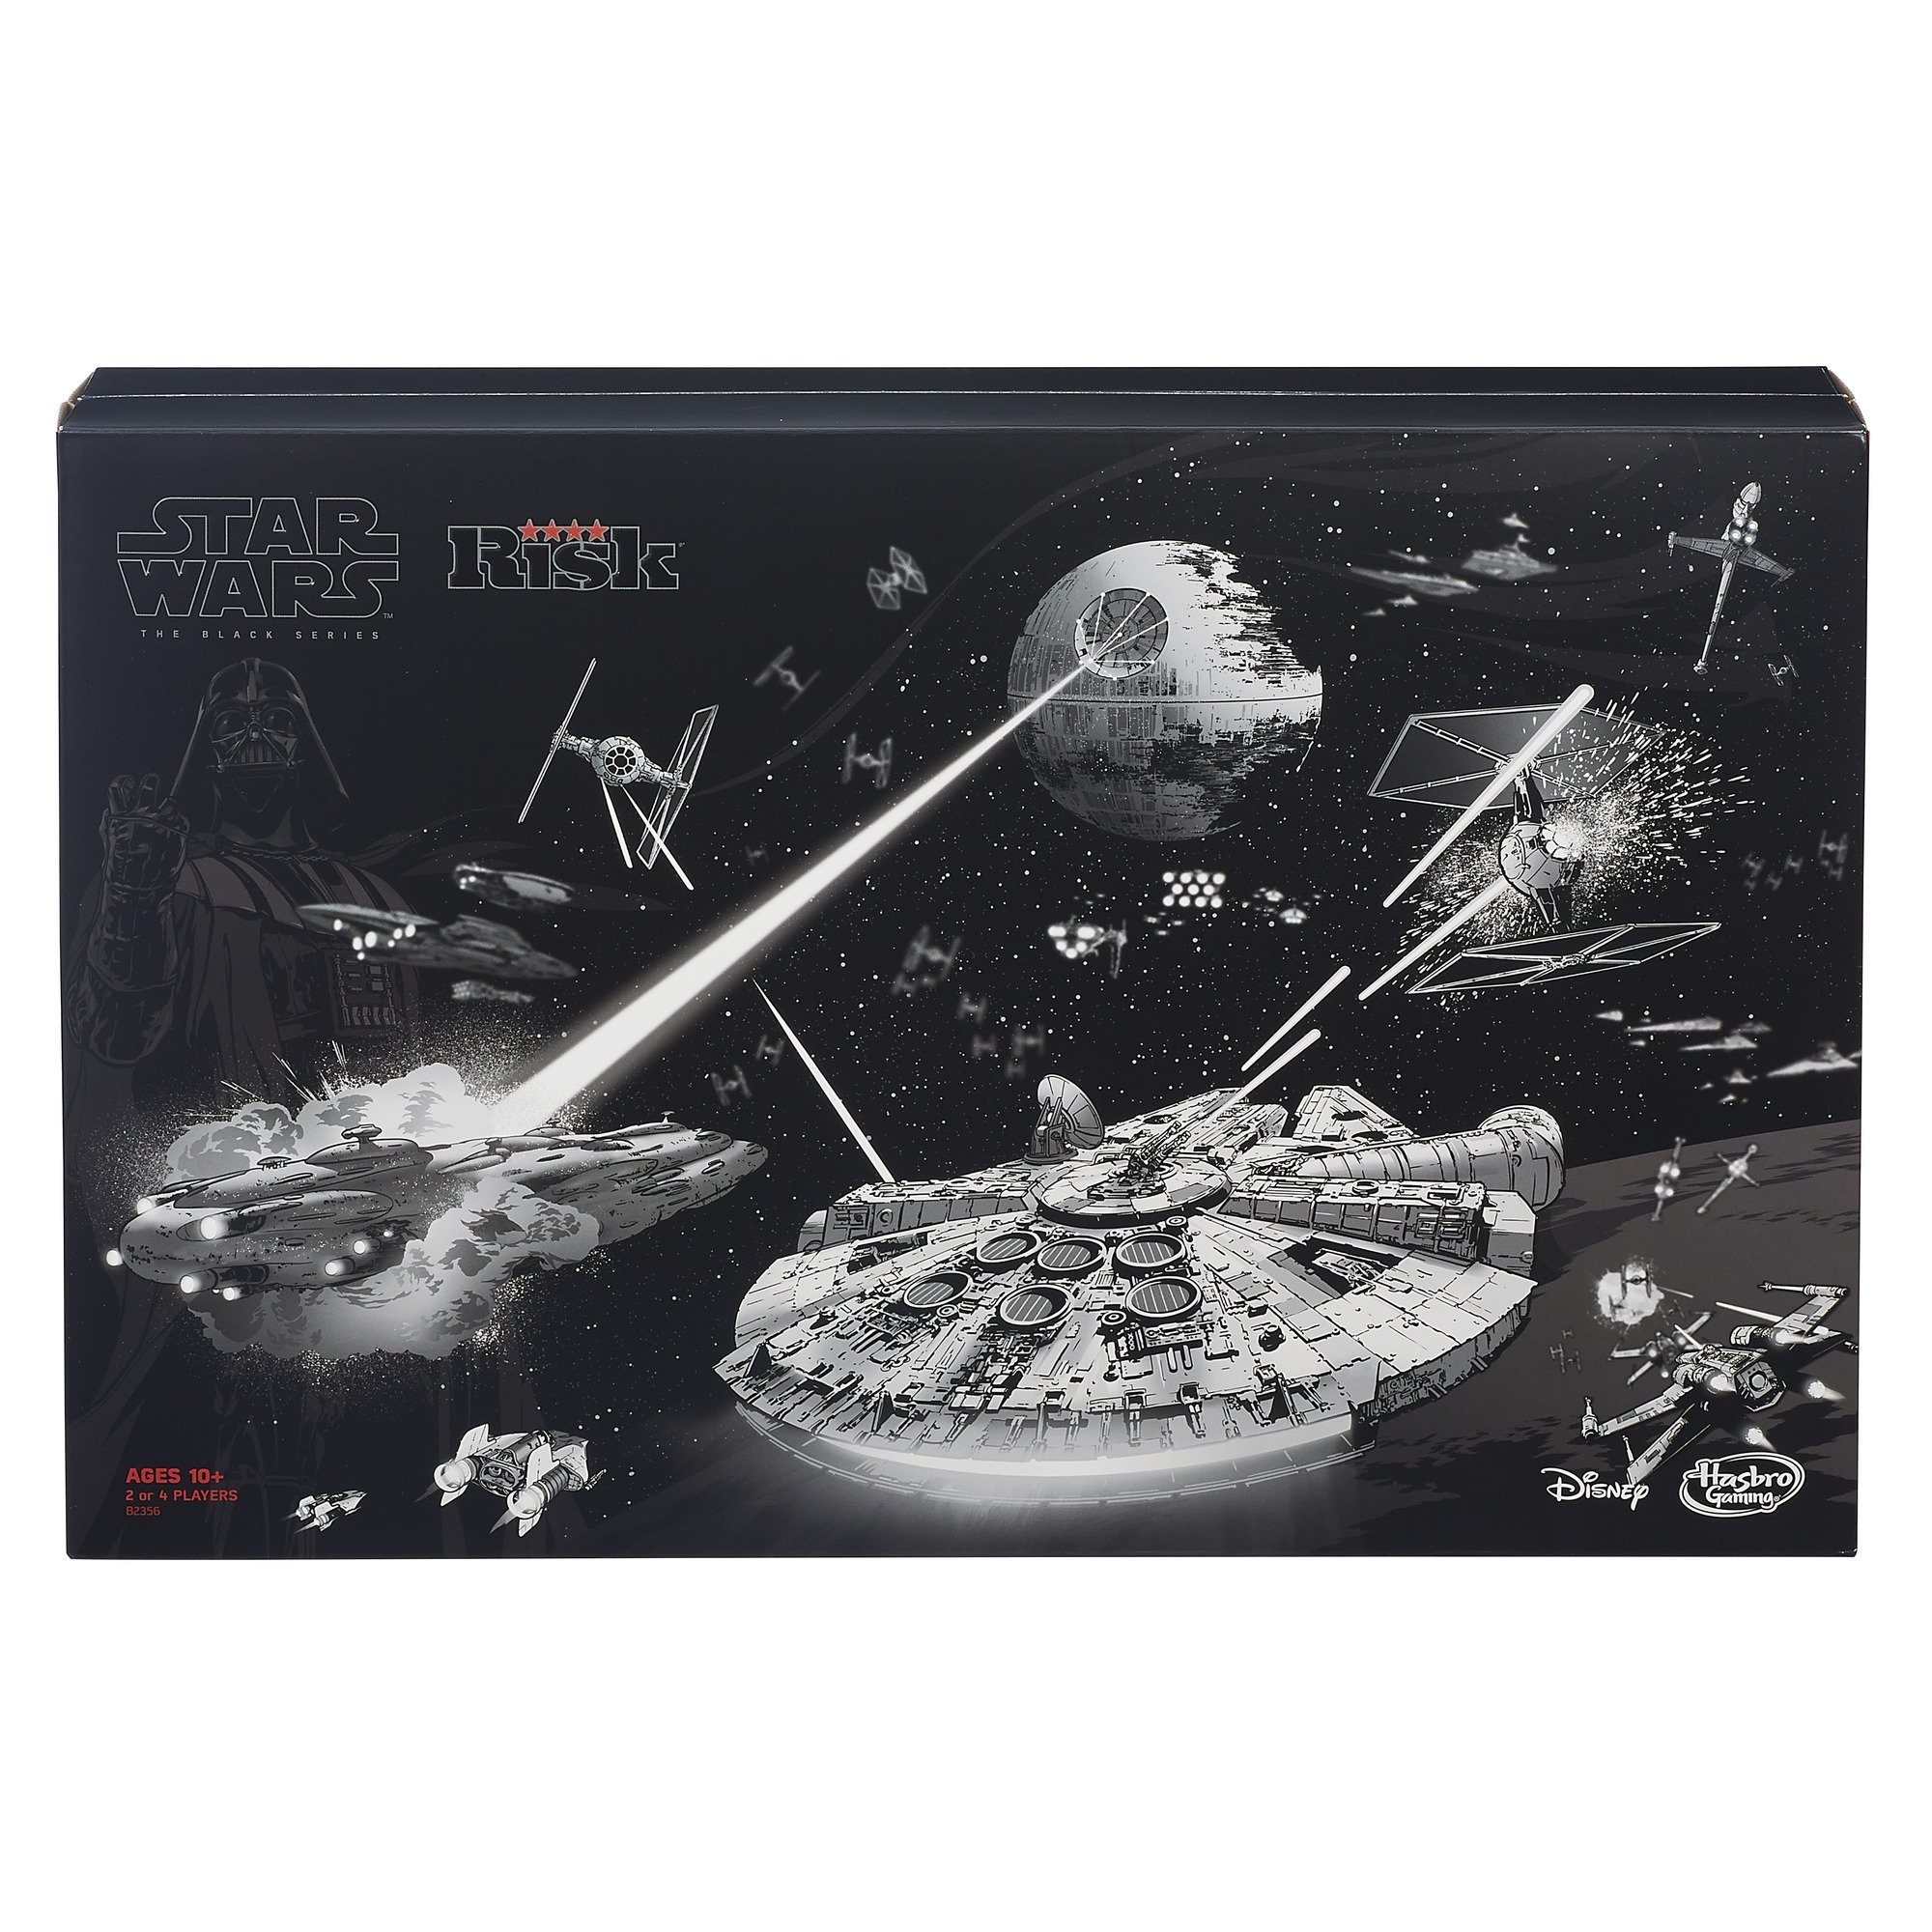 Book Cover Star Wars The Black Series Risk Game